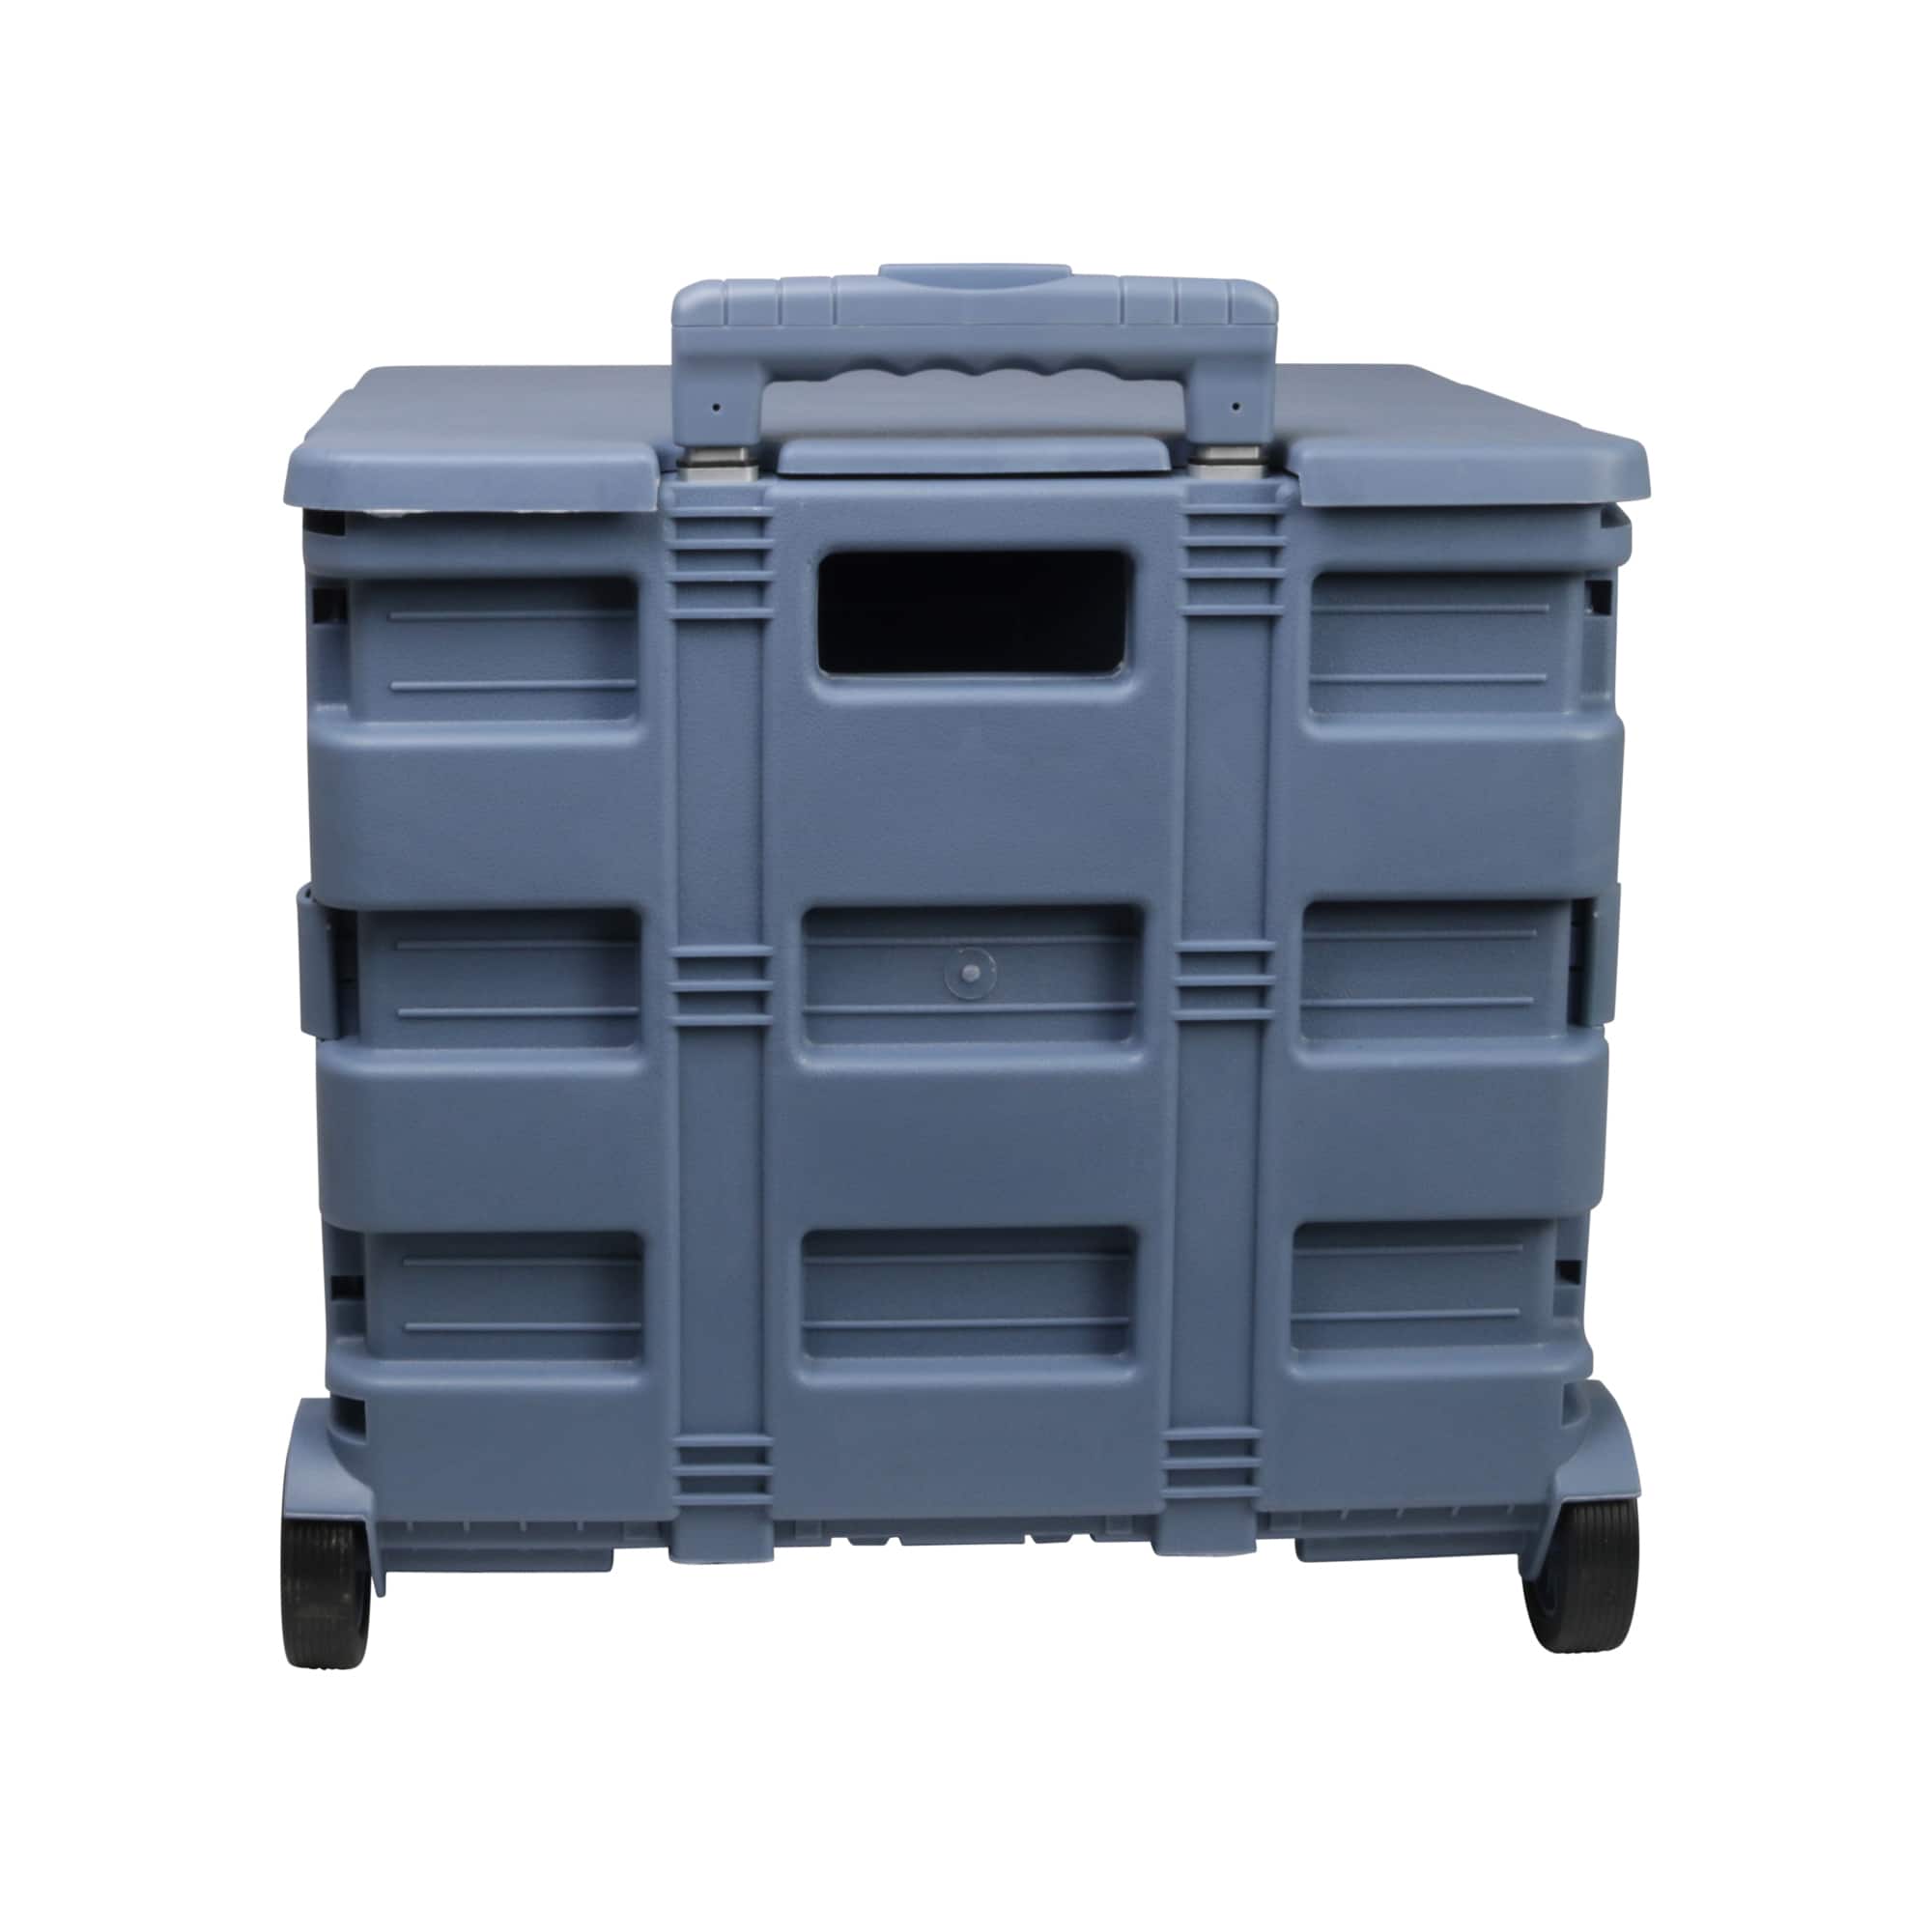 Everything Mary Blue Plastic Collapsible Cart Organizer